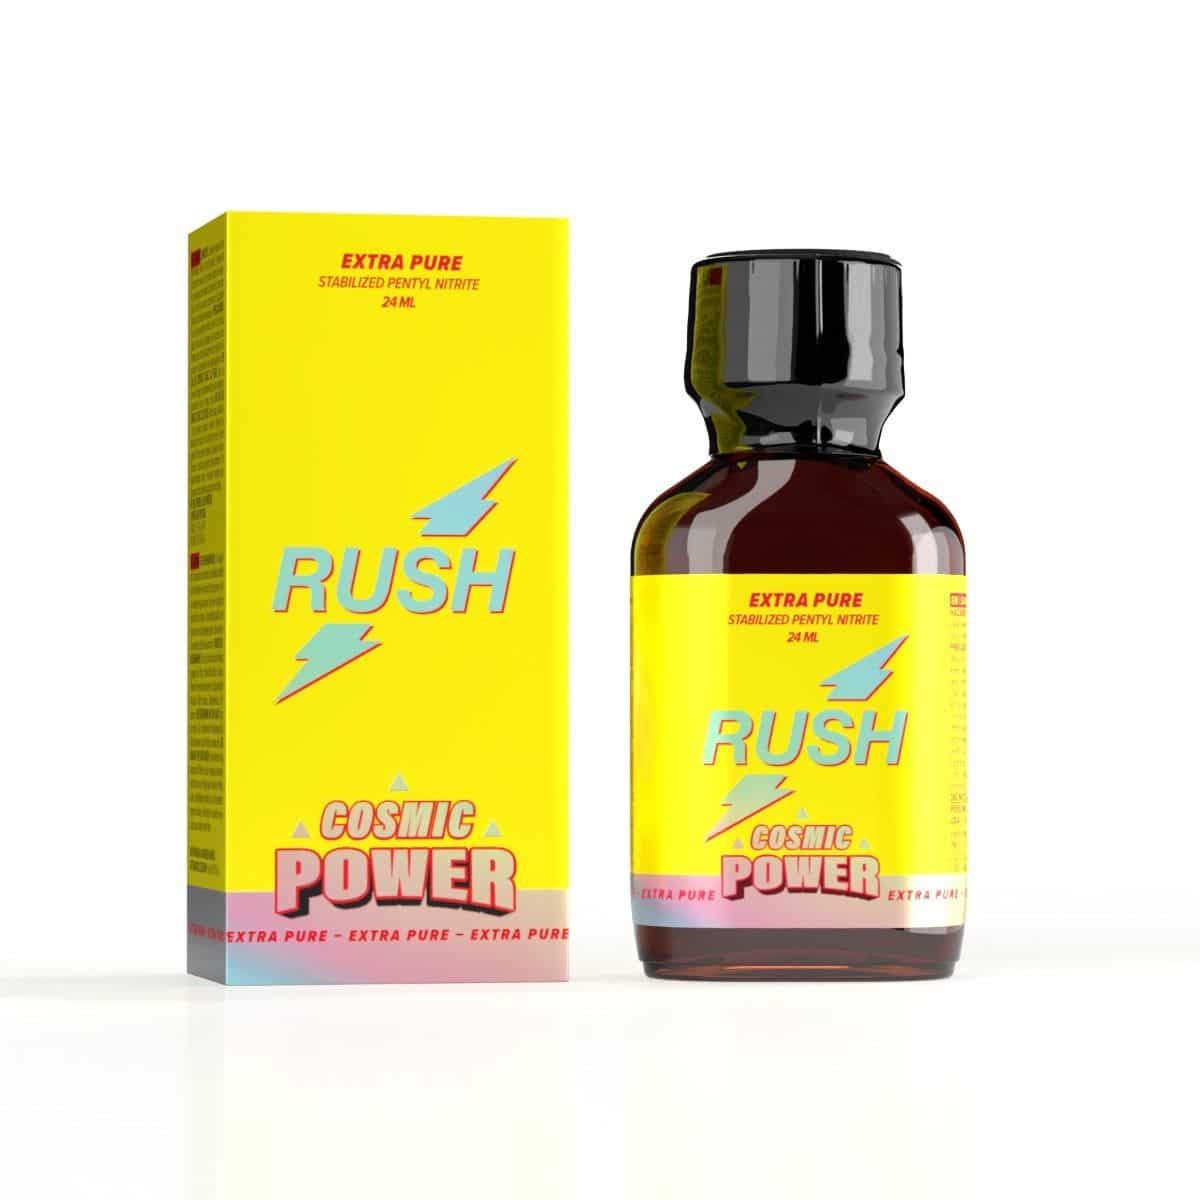 A bottle of "Rush Cosmic Power Pentyl" supplement with a vibrant yellow packaging, promising an "extra pure" Pentyl formulation for a boost of energy.